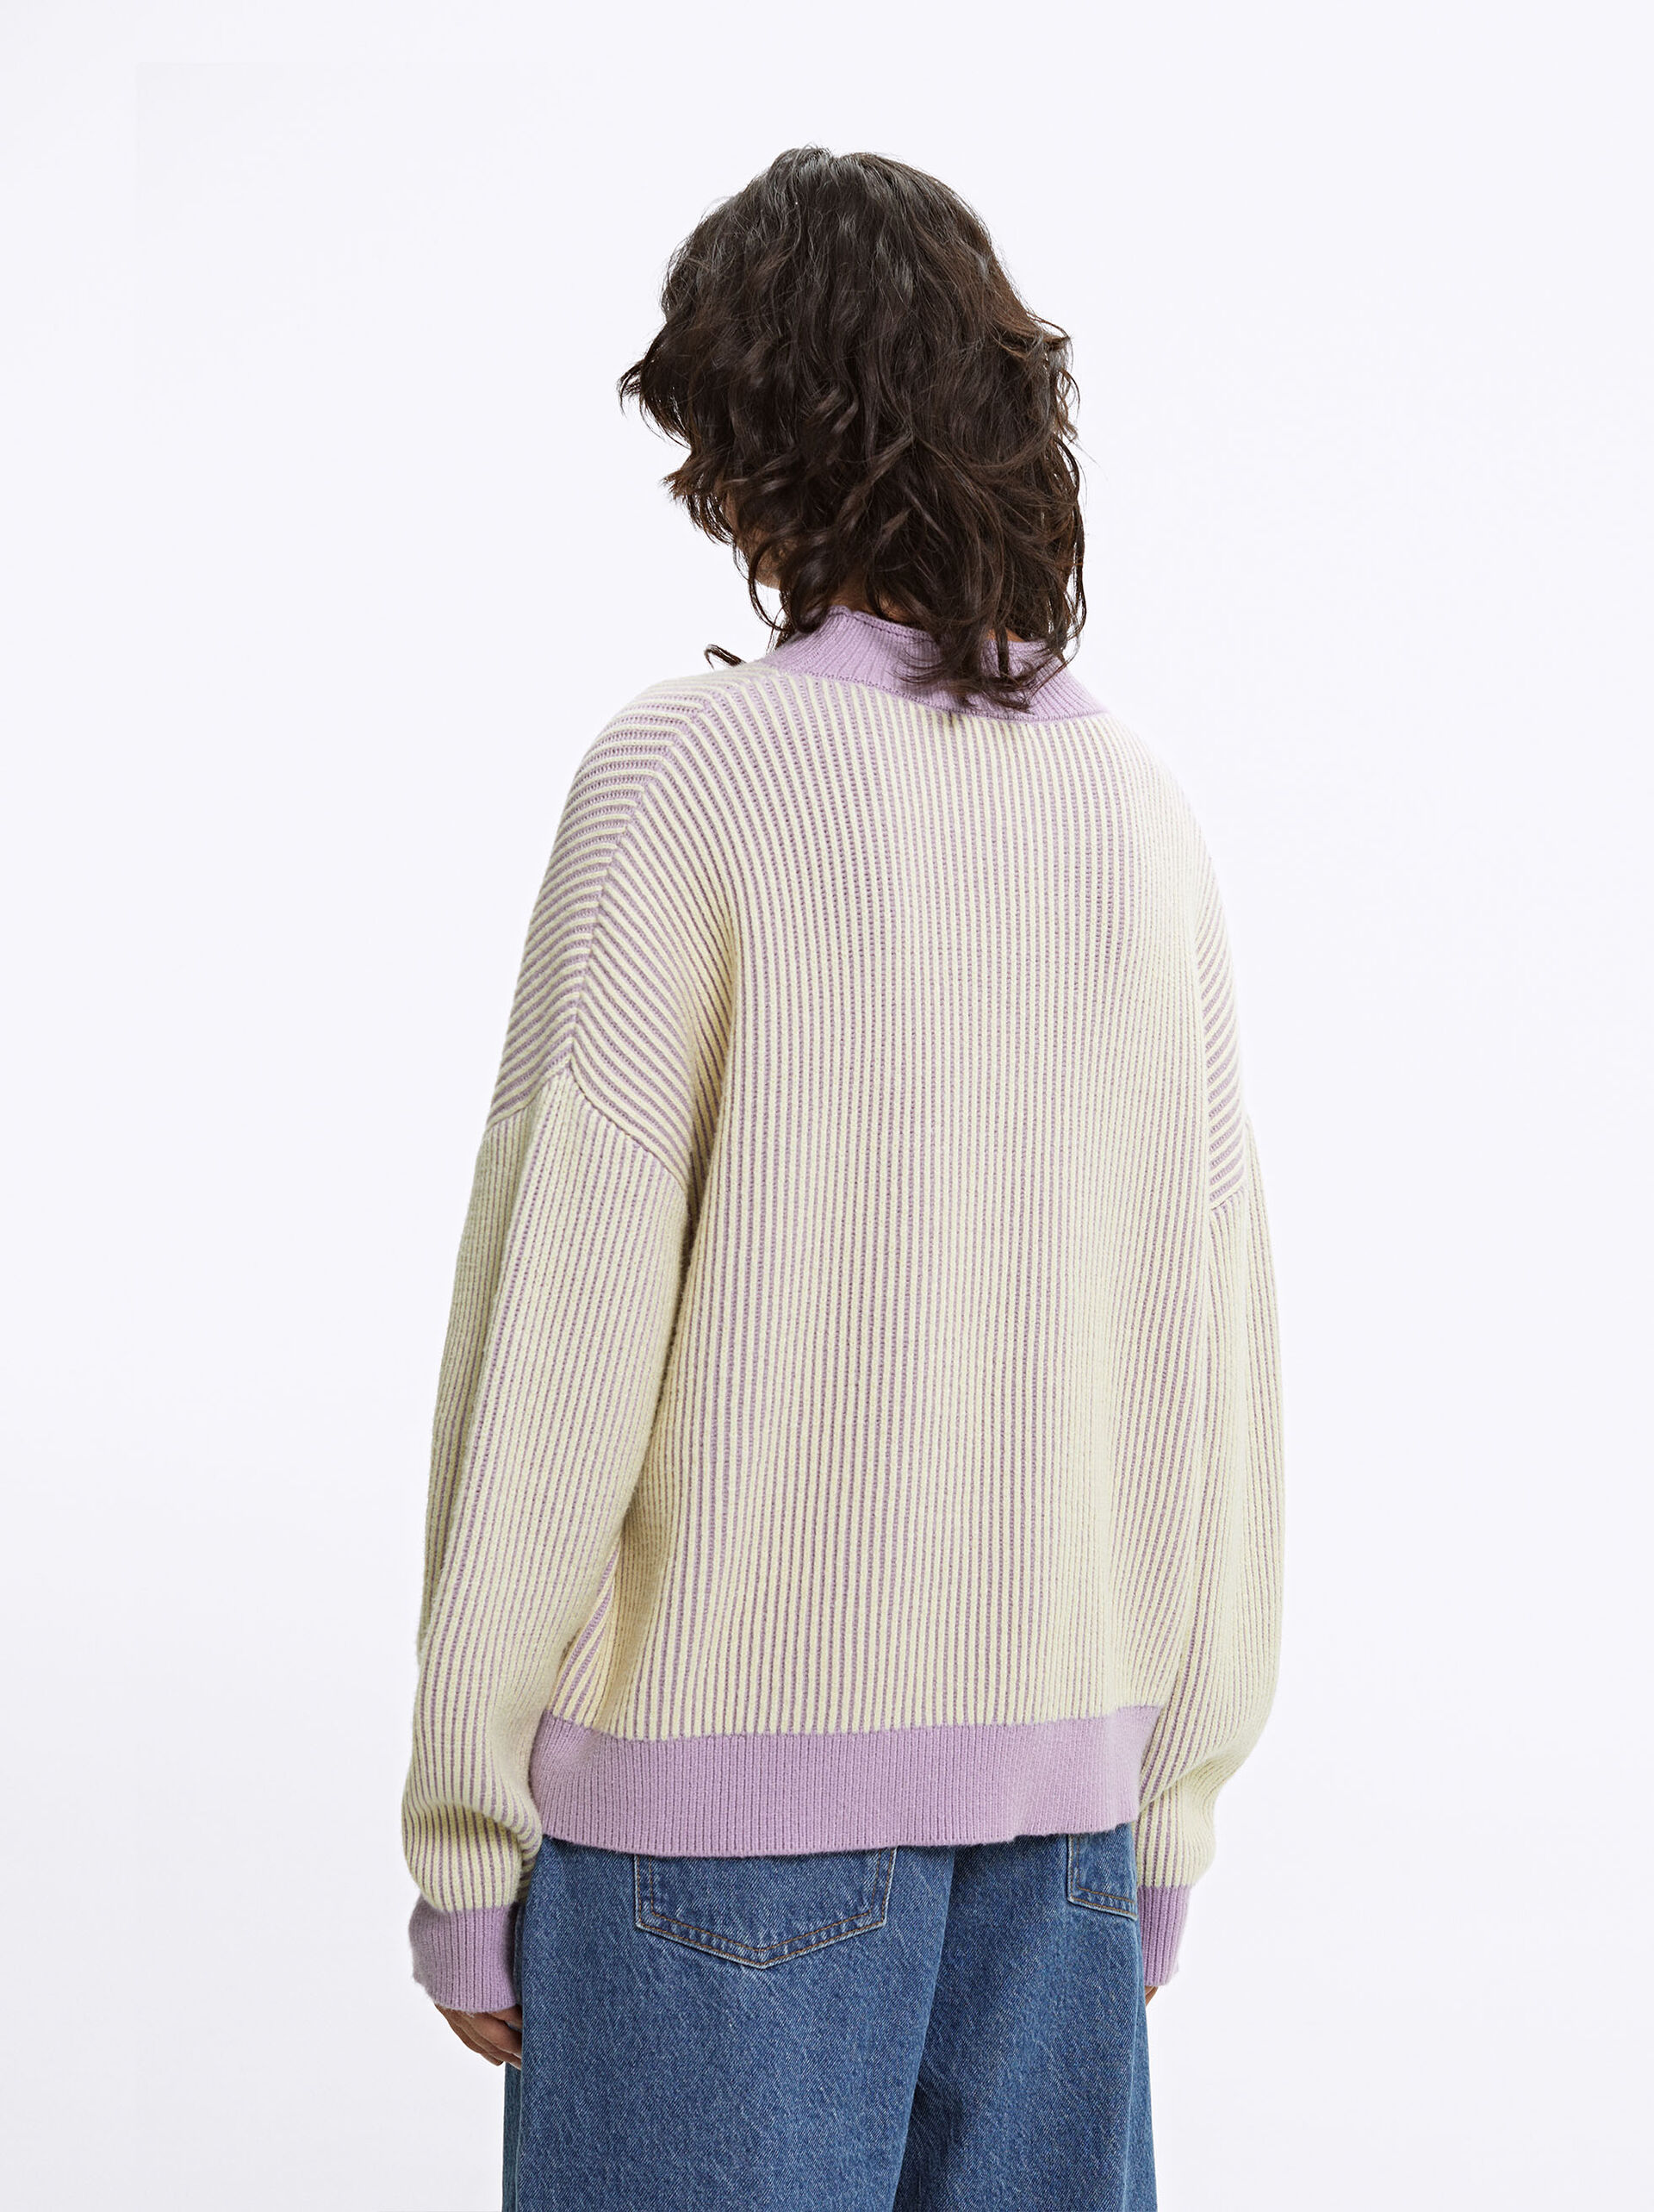 Rib Knit Sweater image number 3.0